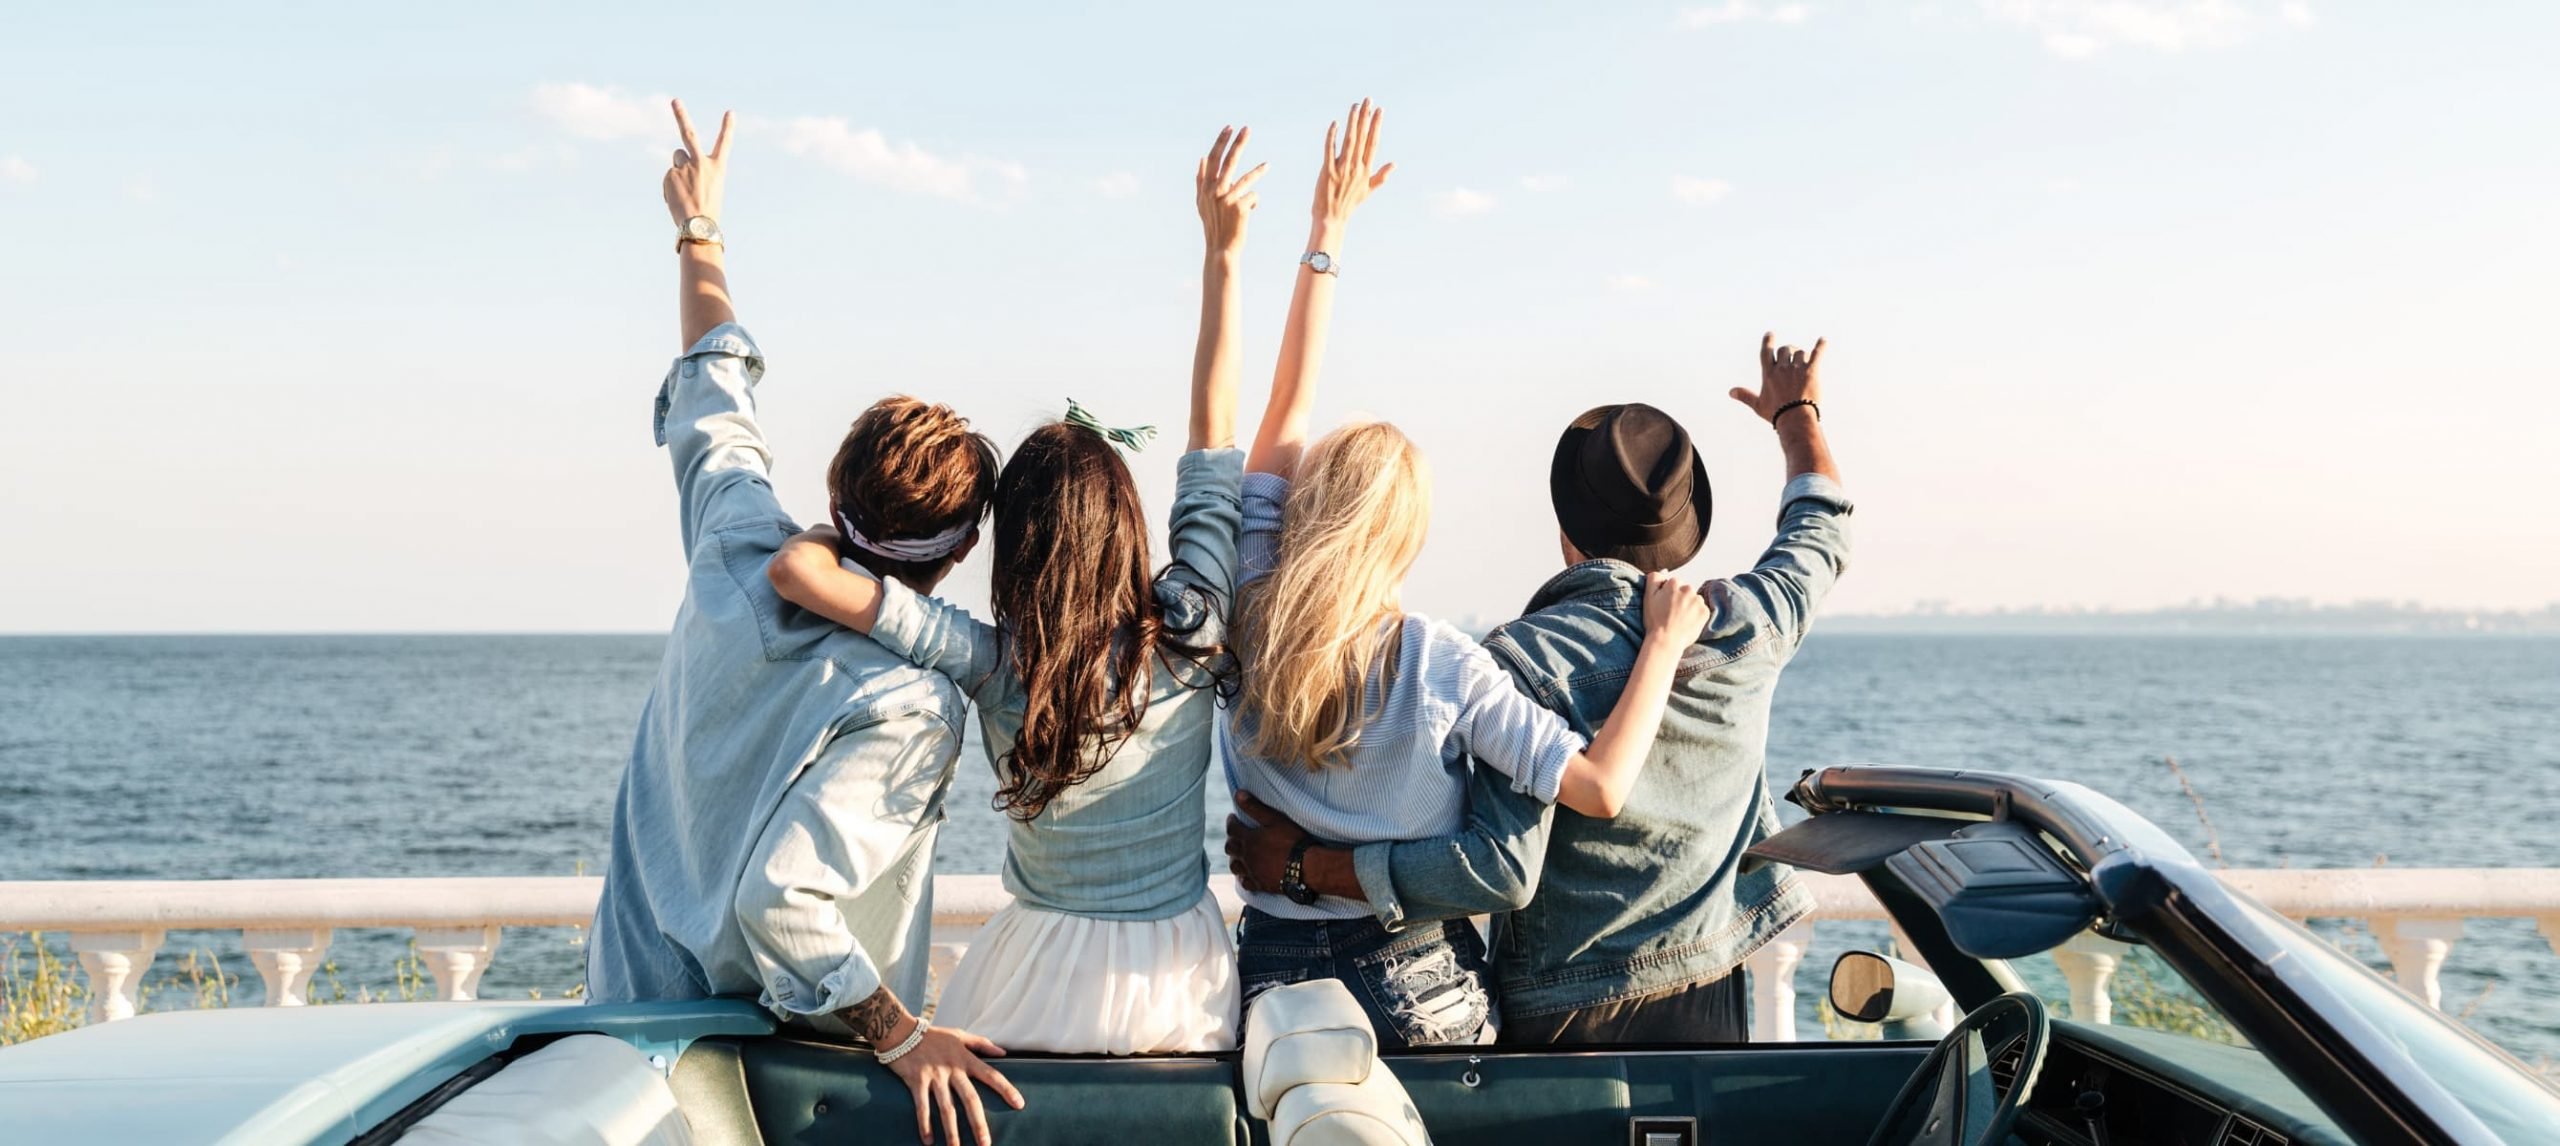 A group of four friends, two girls and two boys, on a car, celebrating during a weekend trip together.